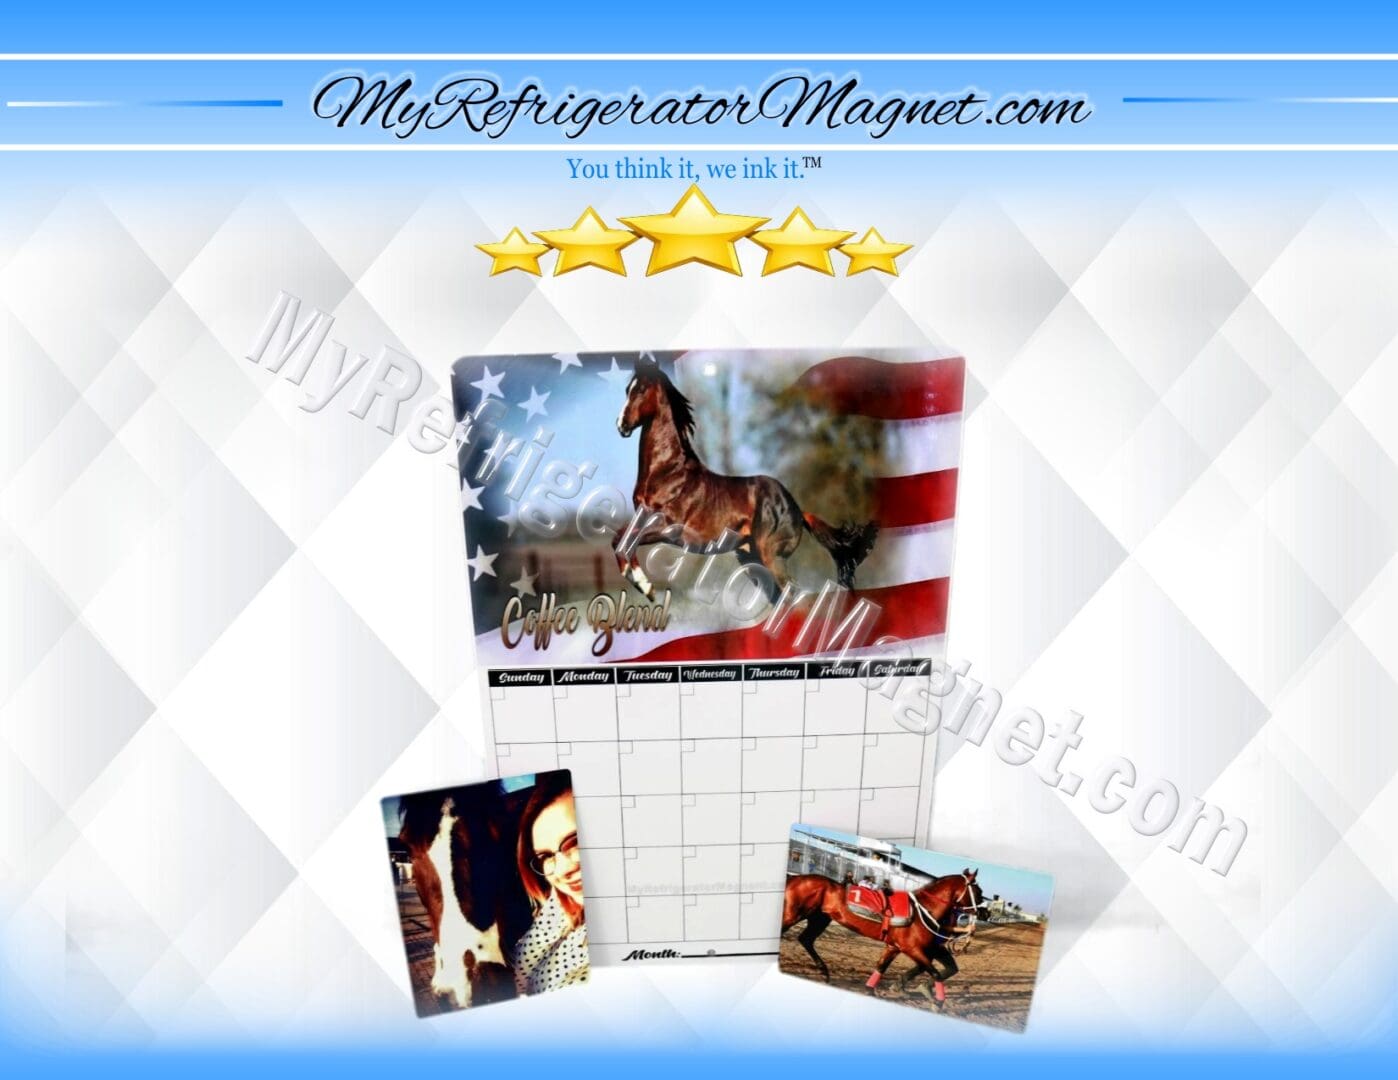 A calendar with pictures of horses and an american flag.